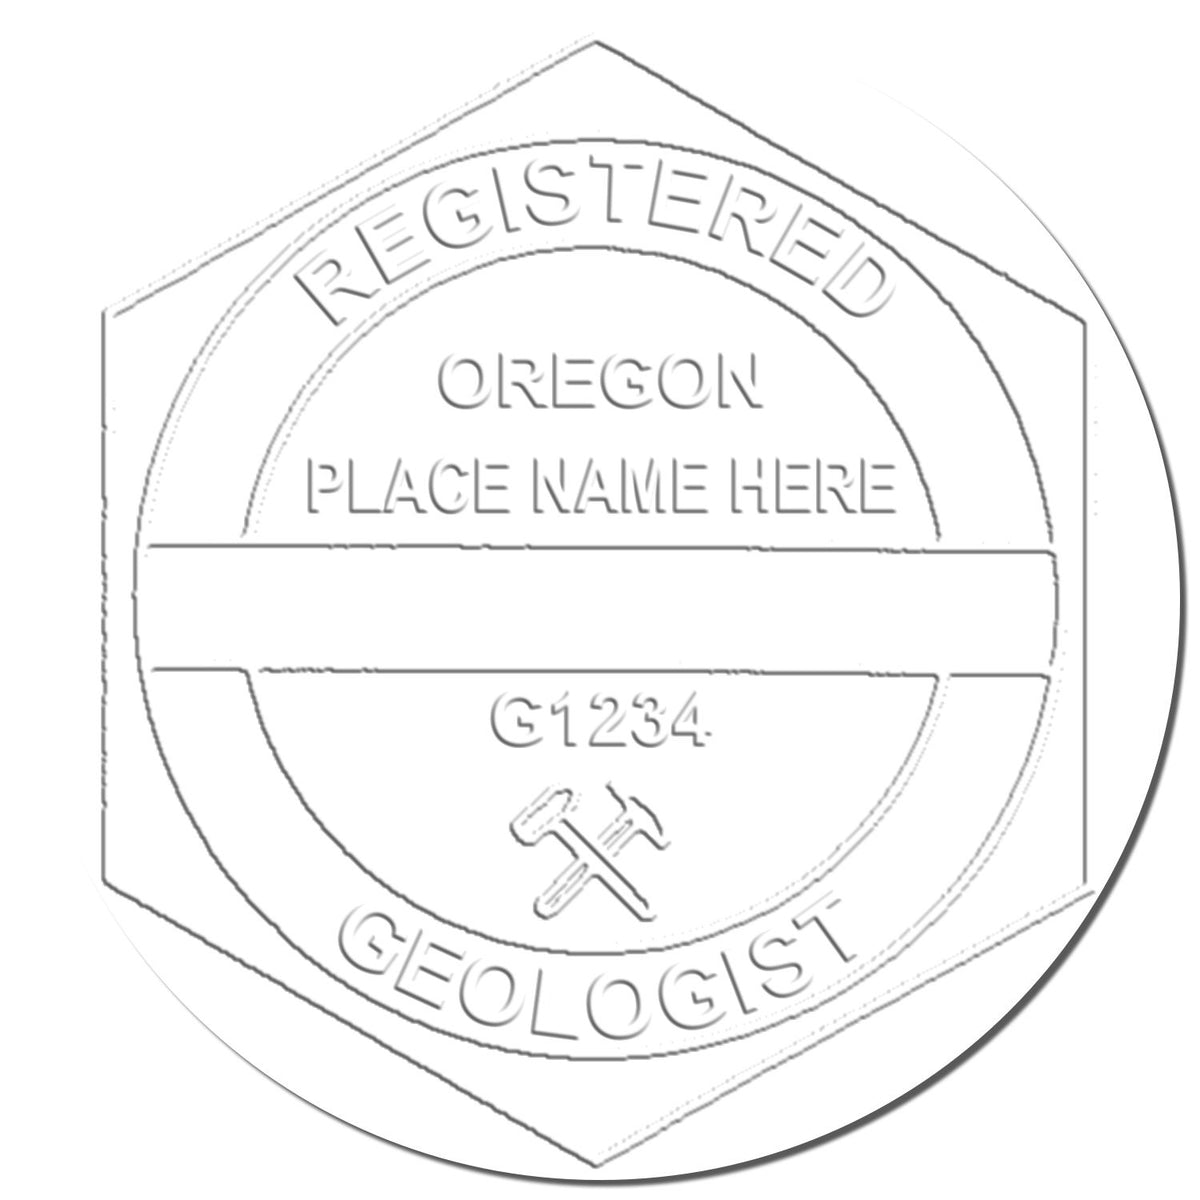 A stamped imprint of the Soft Oregon Professional Geologist Seal in this stylish lifestyle photo, setting the tone for a unique and personalized product.